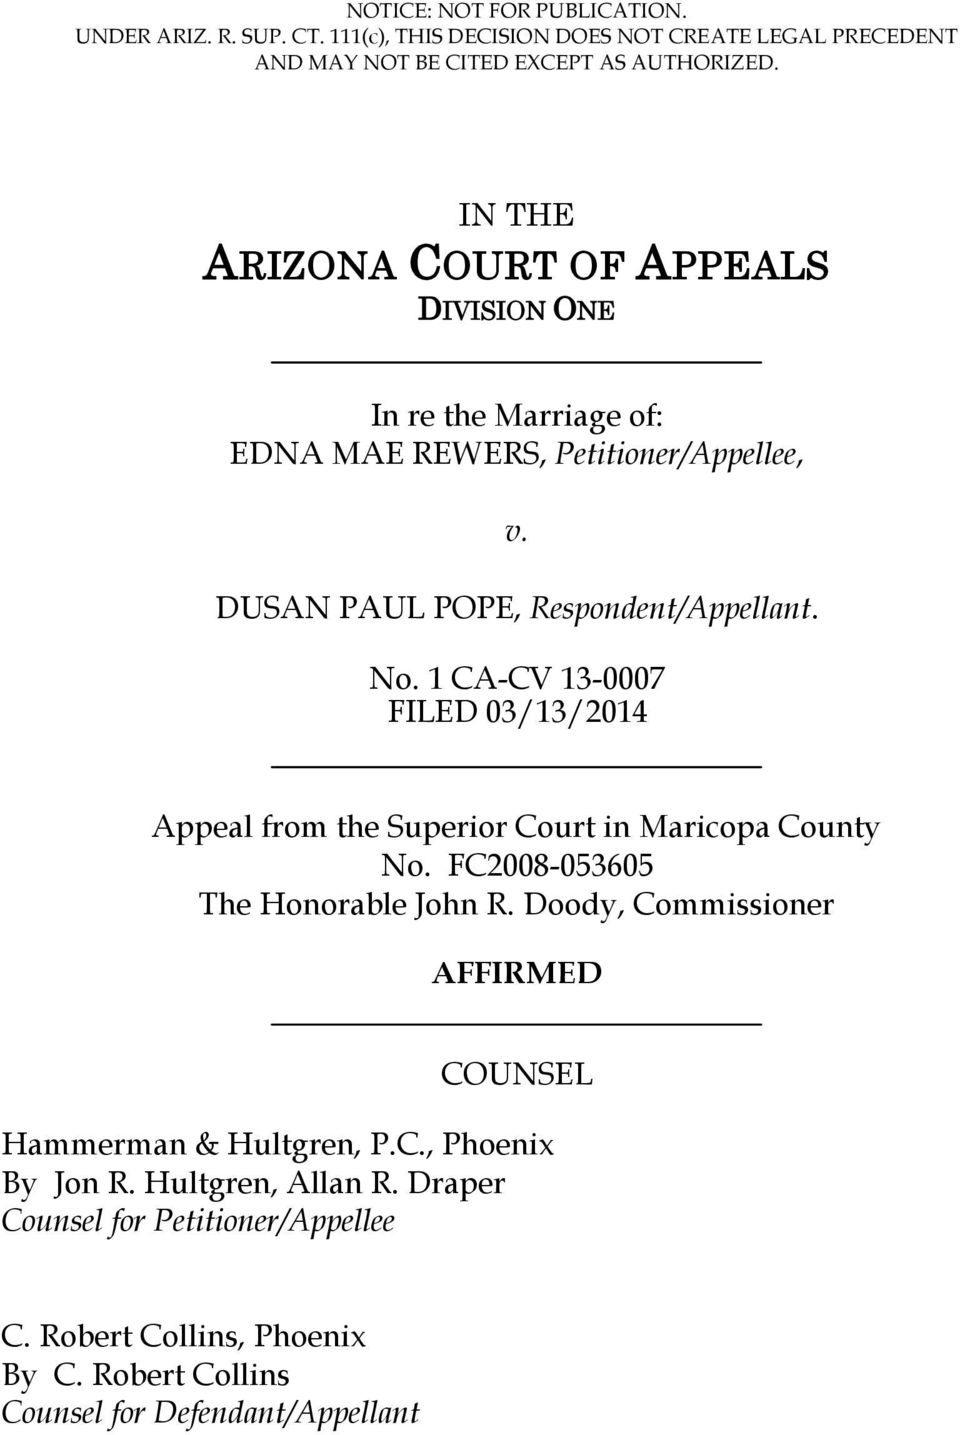 1 CA-CV 13-0007 Appeal from the Superior Court in Maricopa County No. FC2008-053605 The Honorable John R.